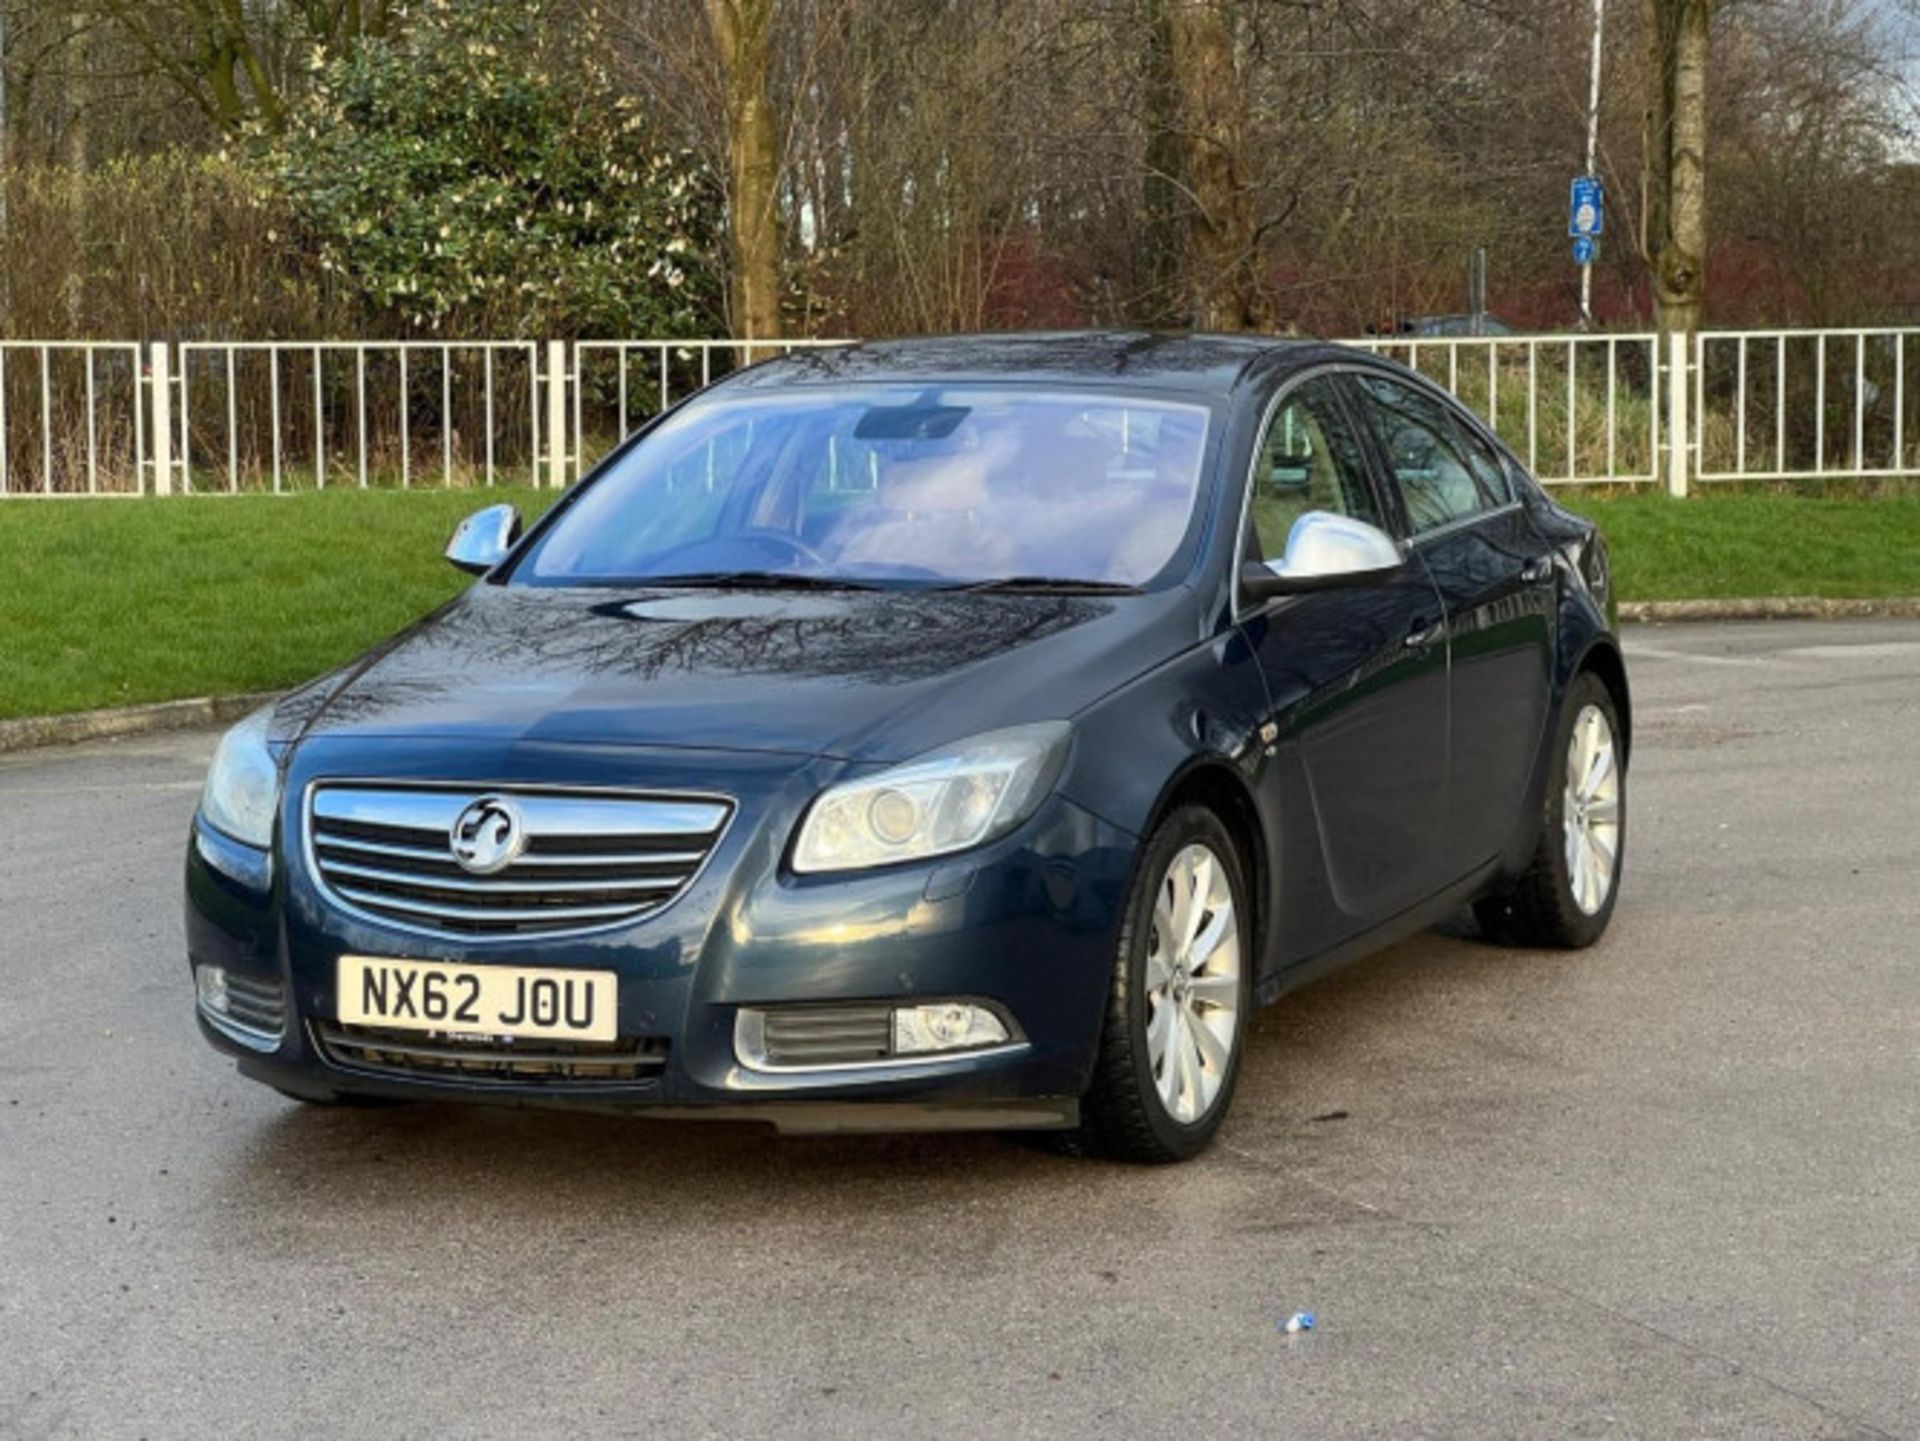 2012 VAUXHALL INSIGNIA 2.0 CDTI ELITE AUTO EURO 5 - DISCOVER EXCELLENCE >>--NO VAT ON HAMMER--<< - Image 113 of 120